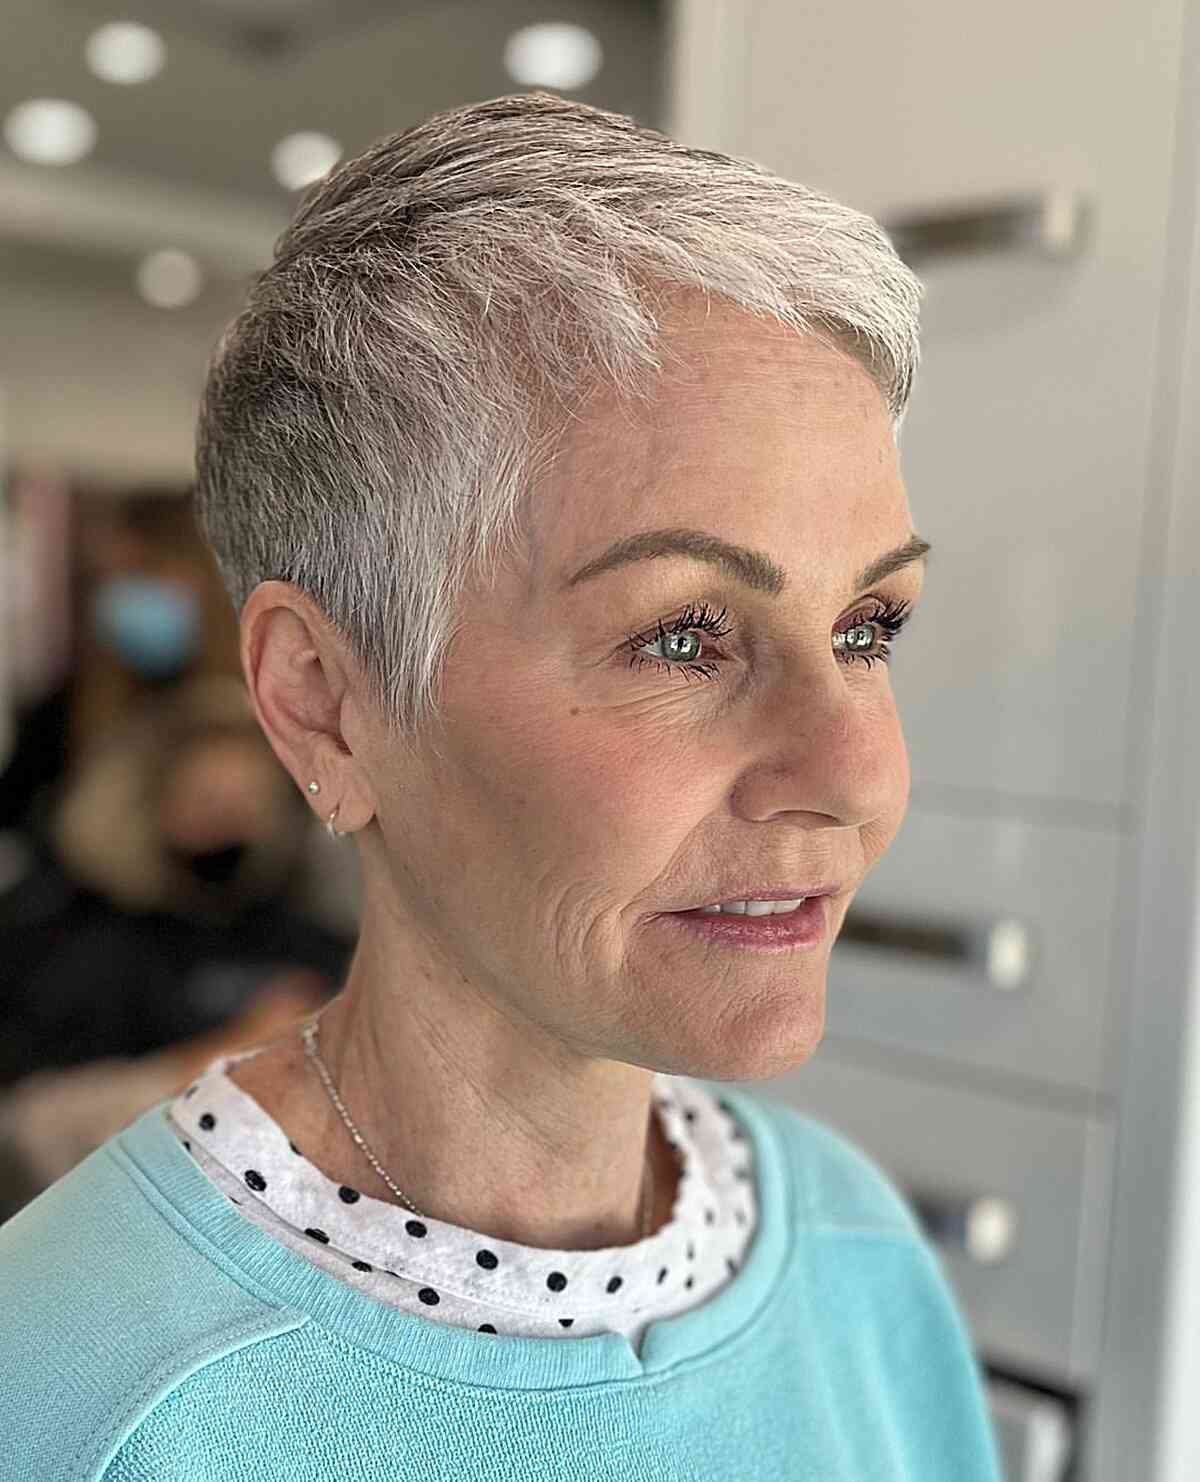 Natural Salt-and-Pepper Pixie Crop for Women Aged 50 with Finer Locks